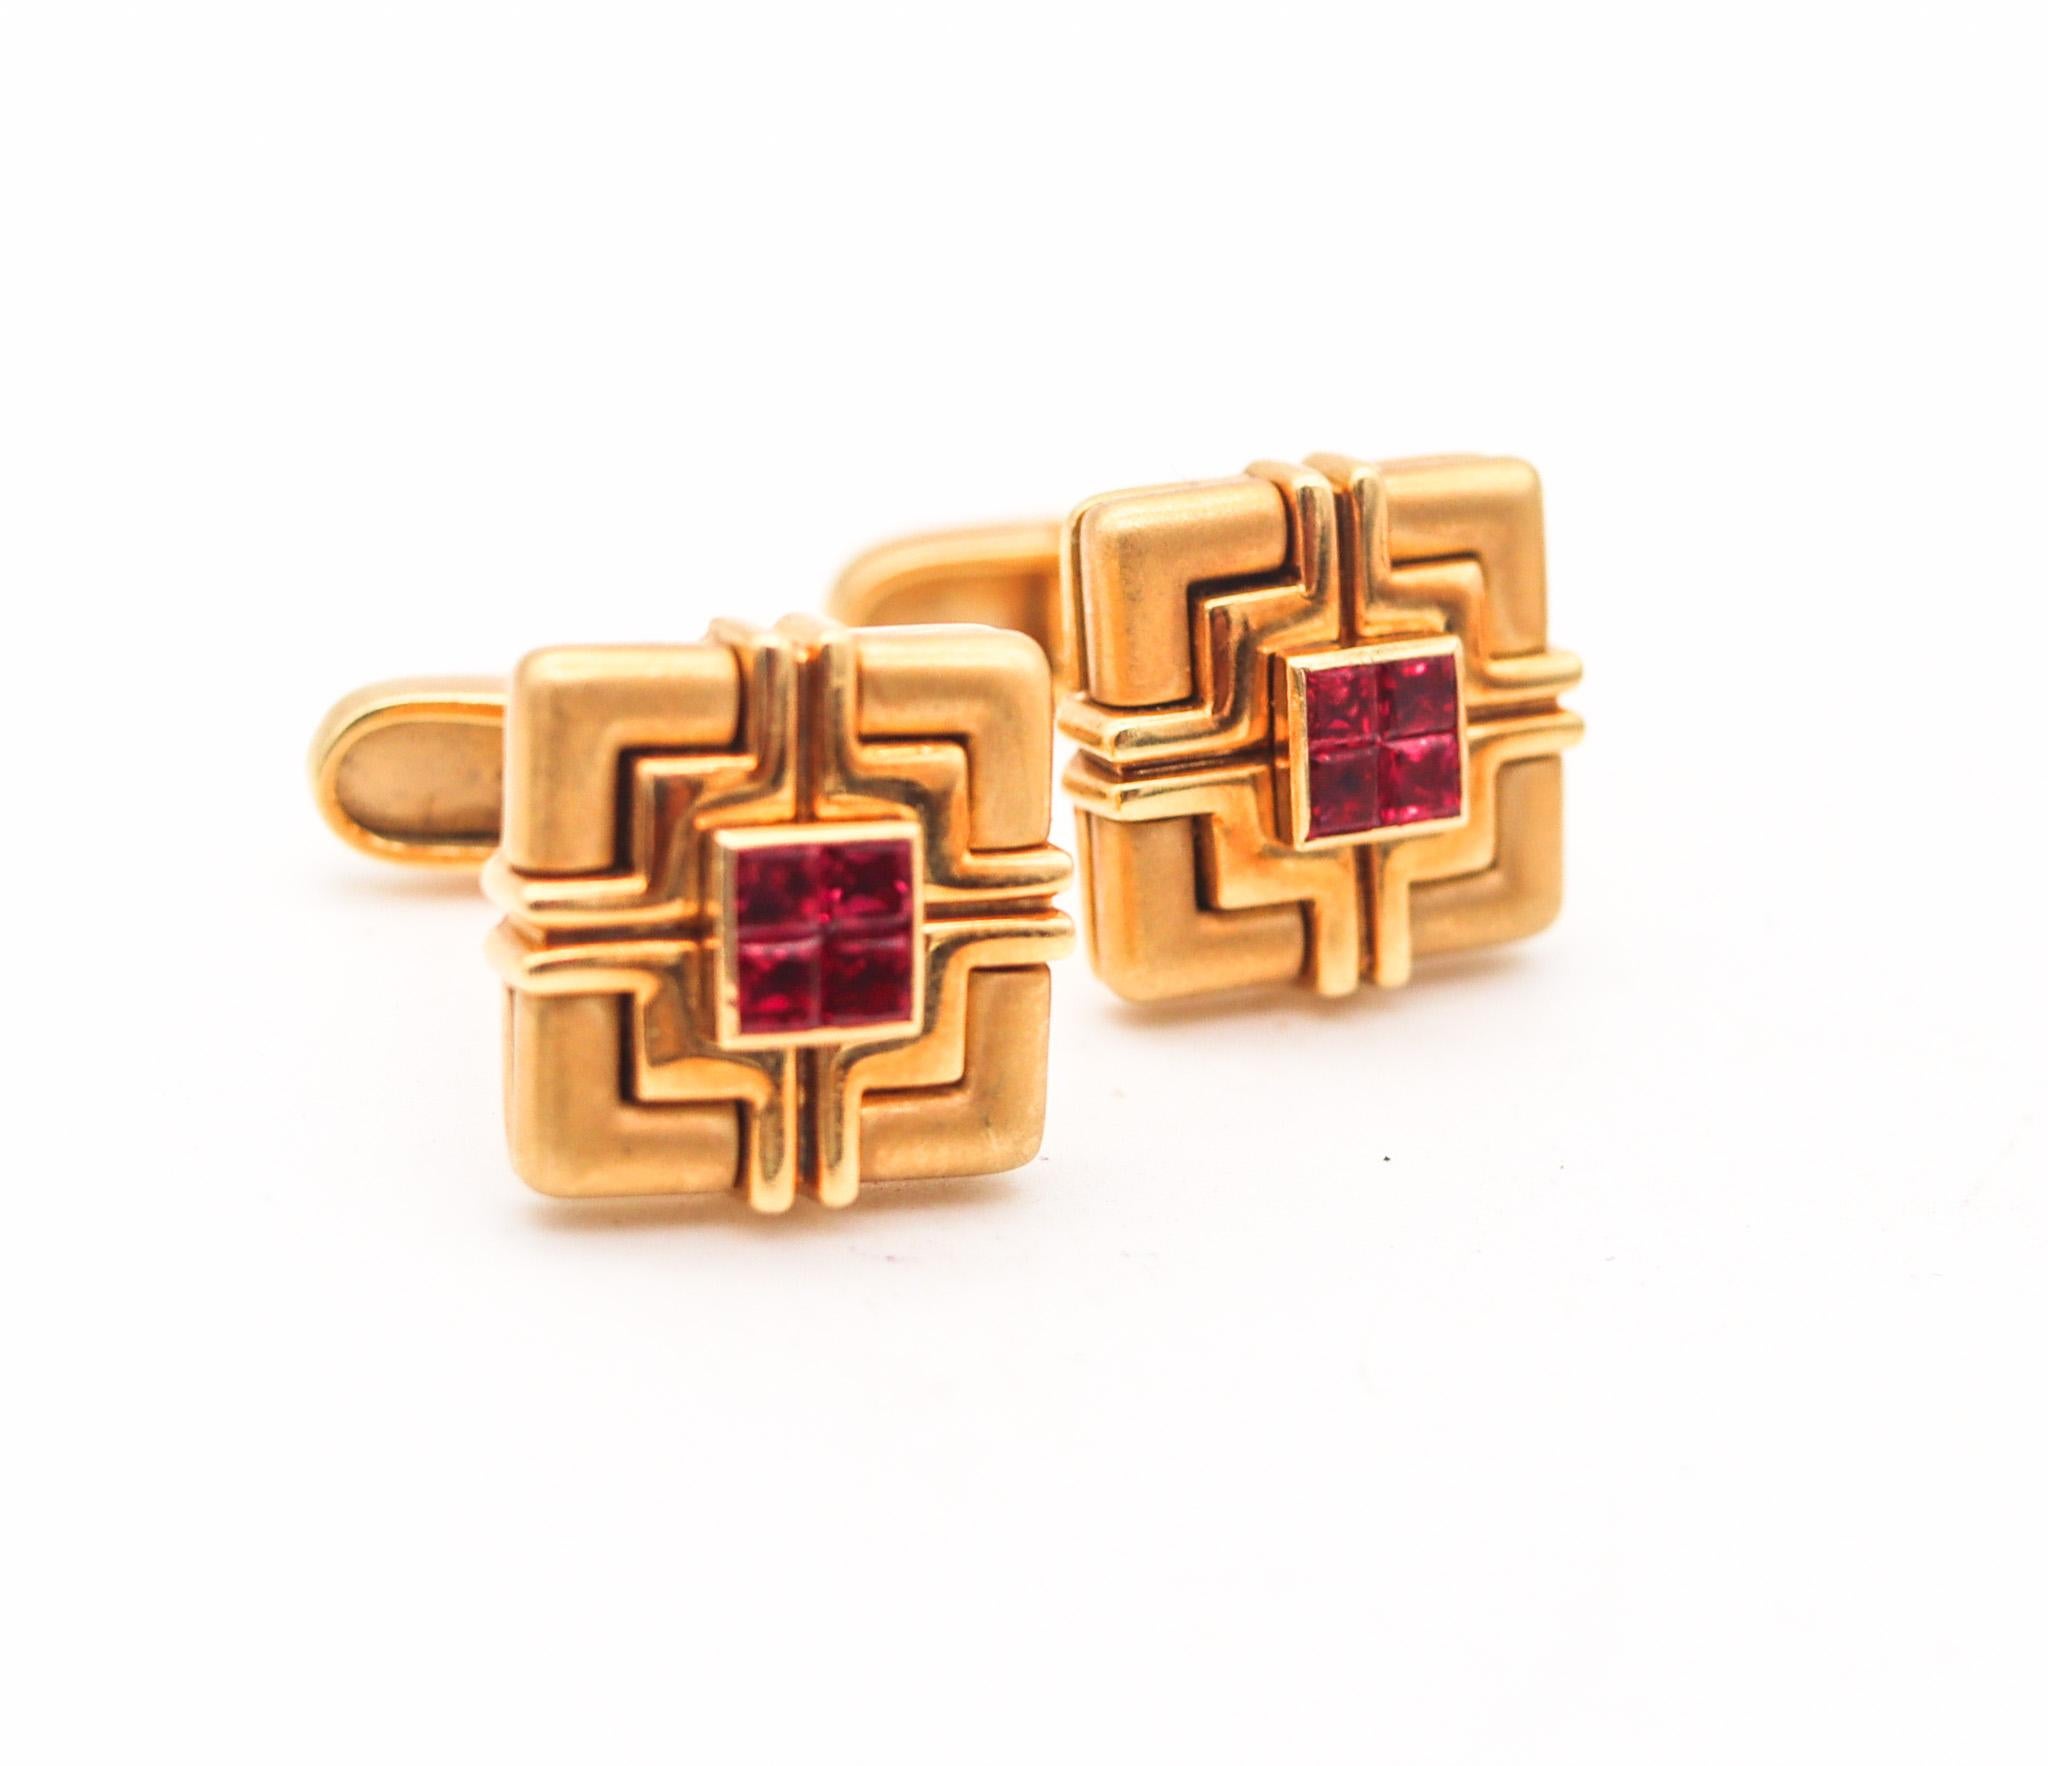 Cufflinks and shirt studs suite with rubies.

Gorgeous set of cufflinks and shirt studs. This elegant suite is composed by six pieces and were carefully crafted in solid yellow gold of 18 karats with high polished and brushed finishes. The pair of